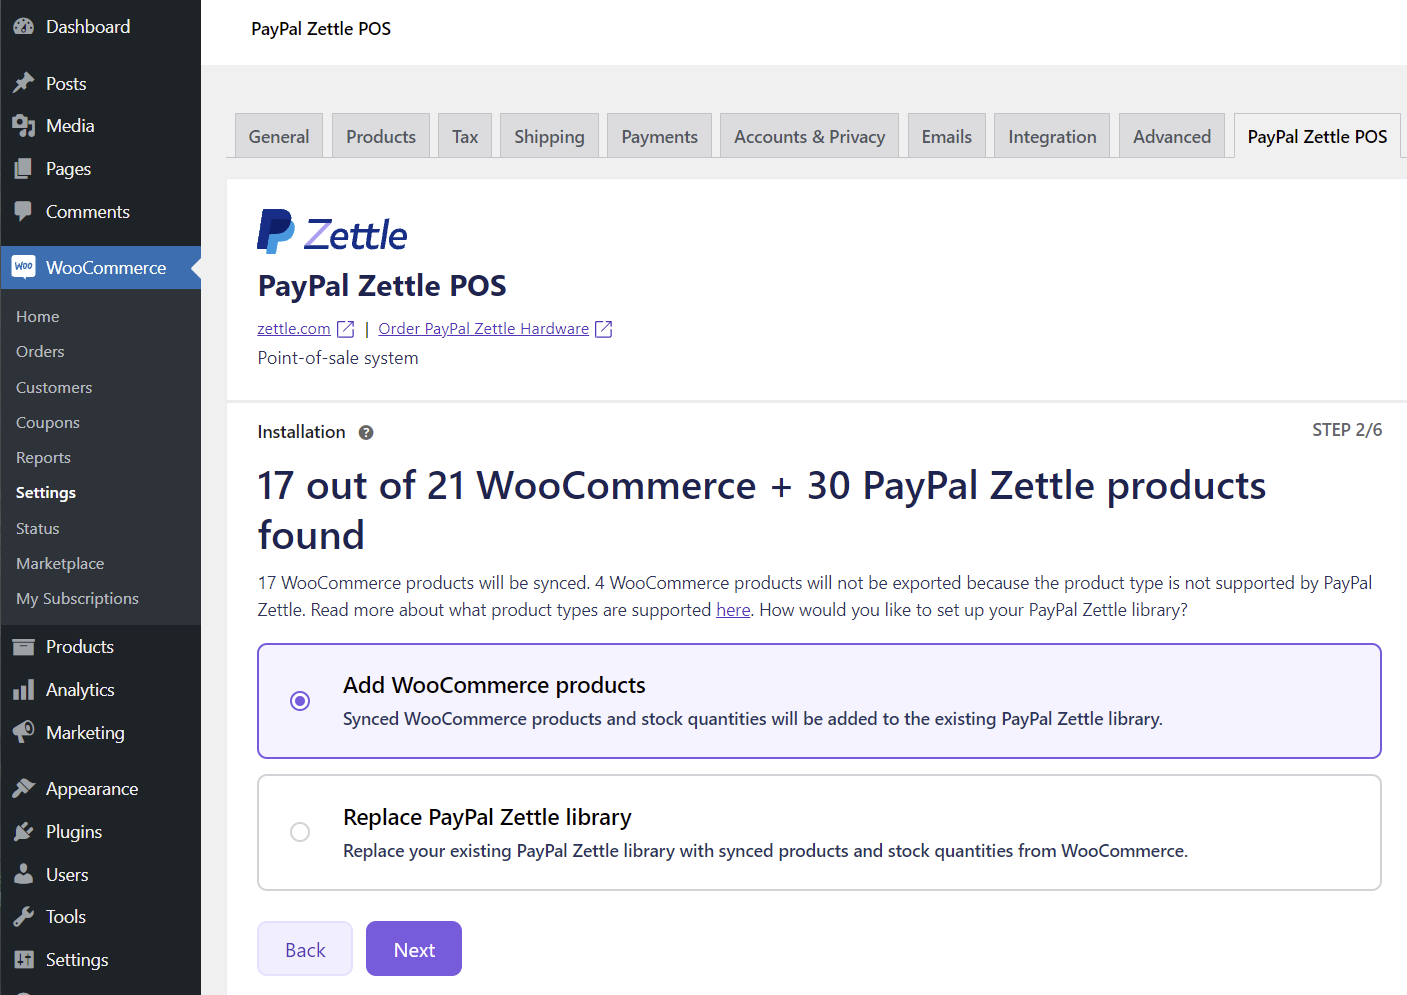 PayPal Zettle POS installation STEP 2